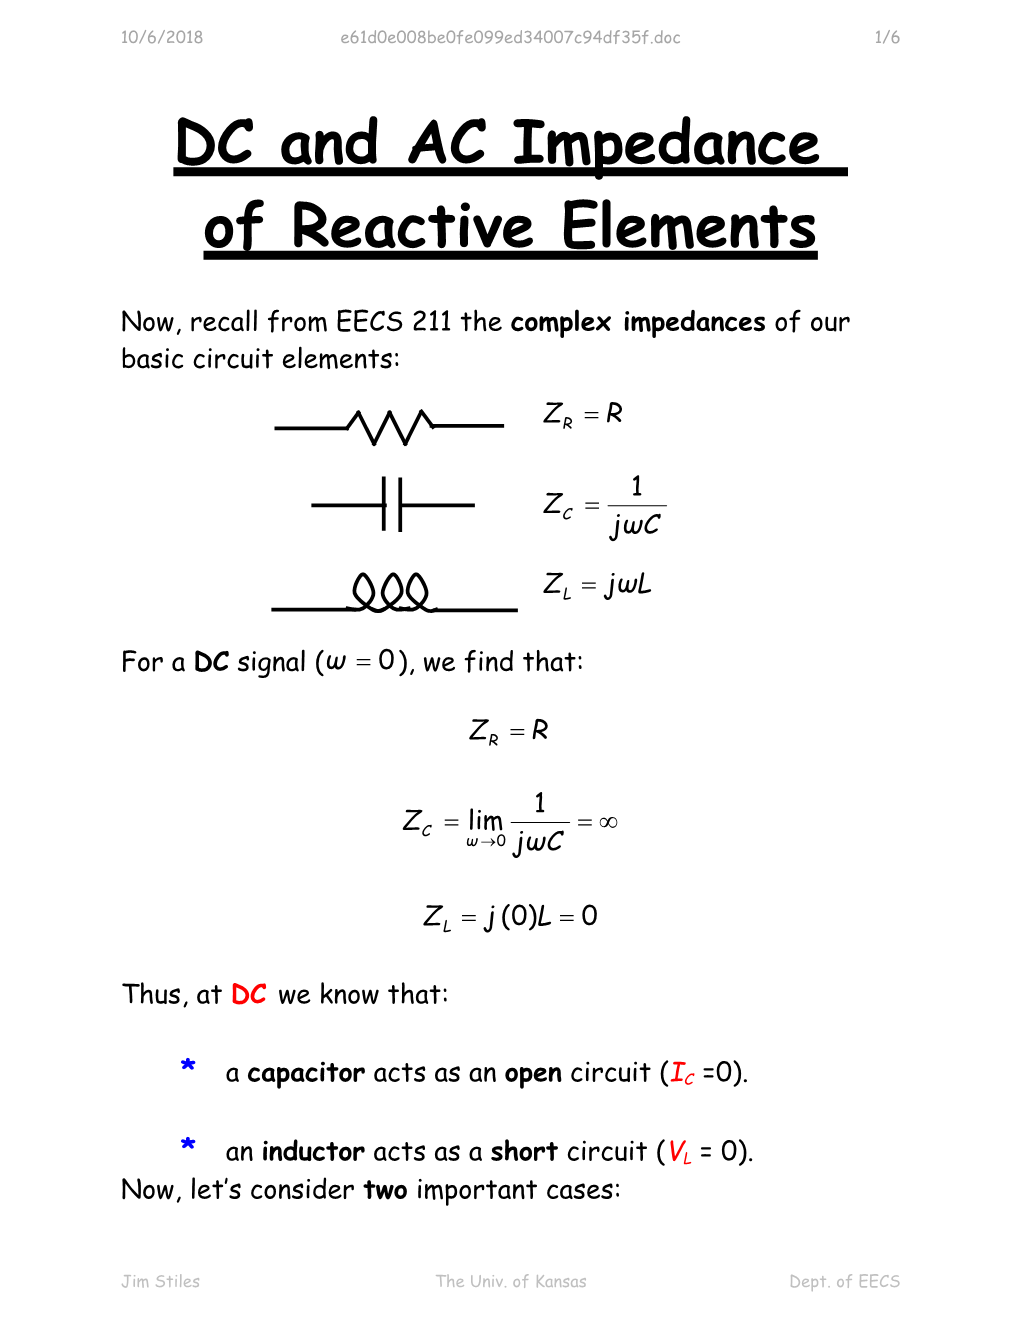 DC and AC Impedence of Reactive Elements